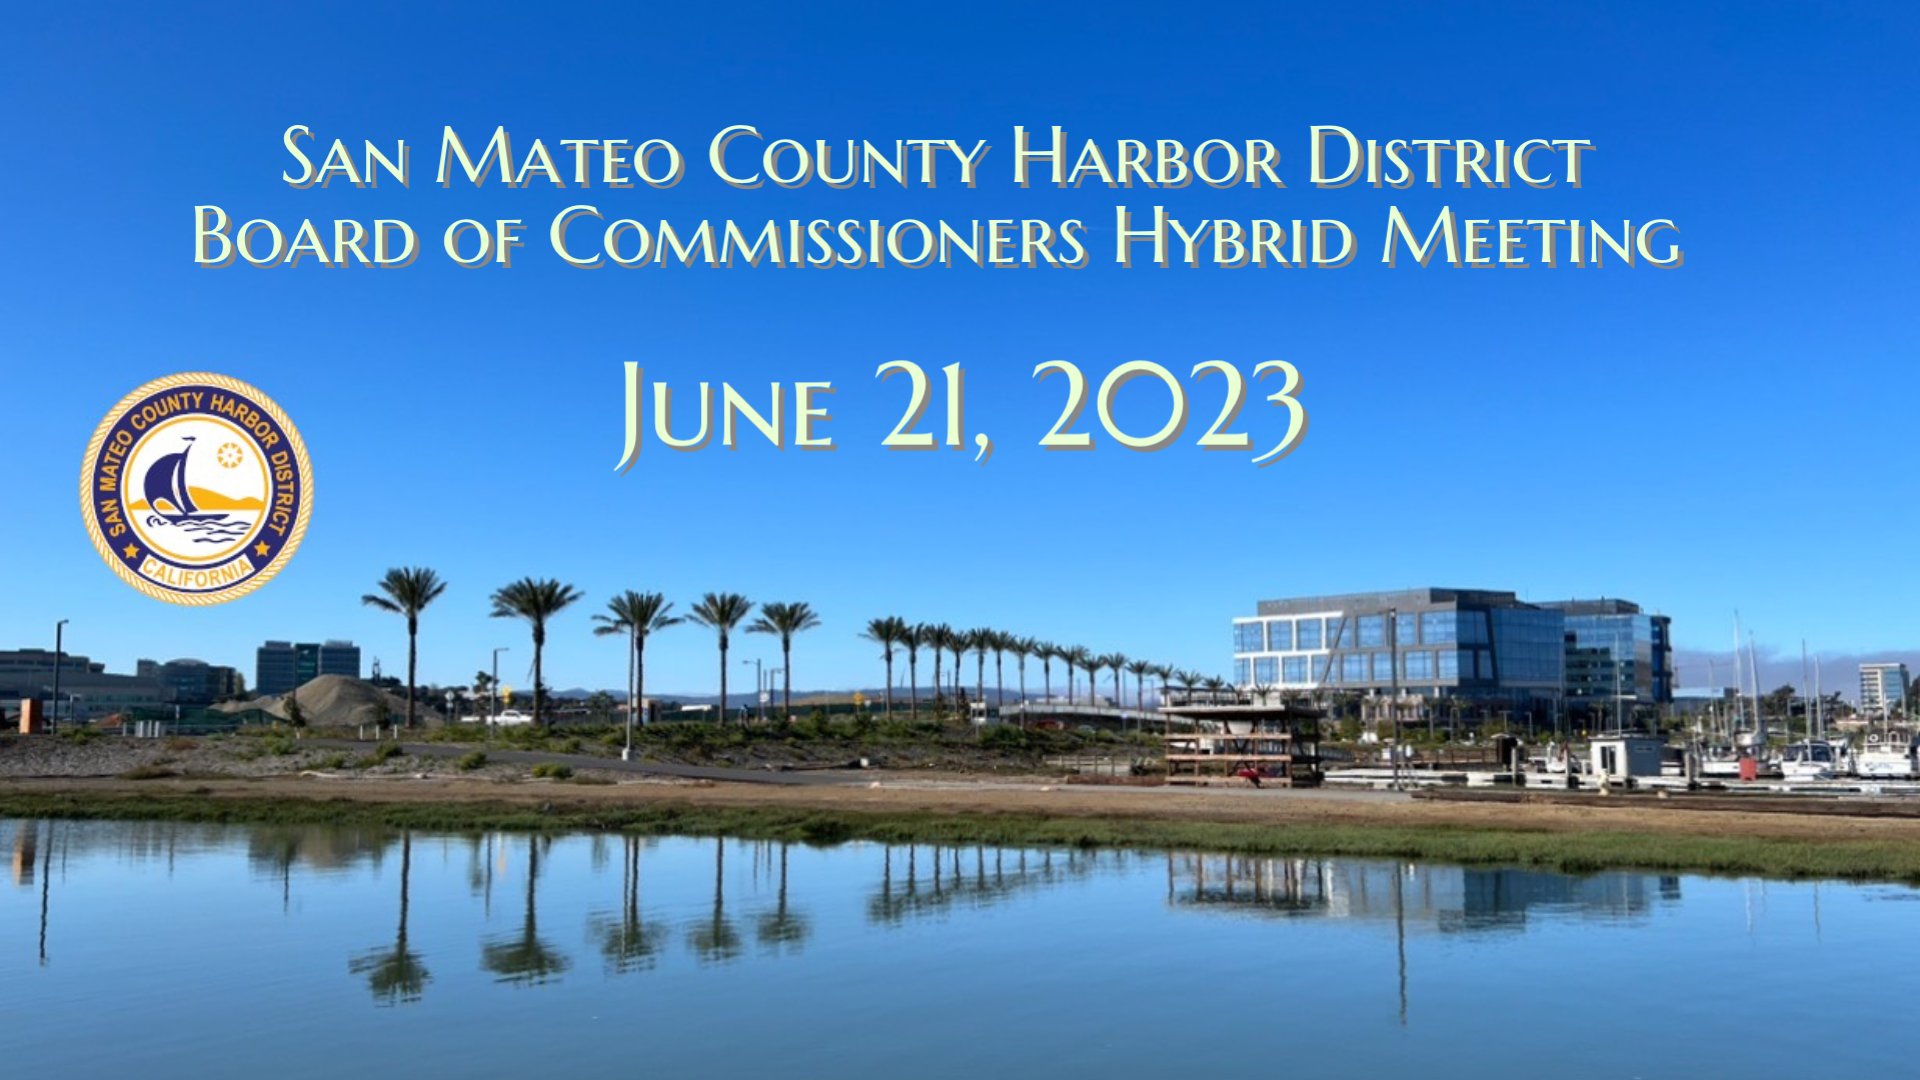 San Mateo County Harbor District Board of Commissioners Hybrid Meeting June 21, 2023